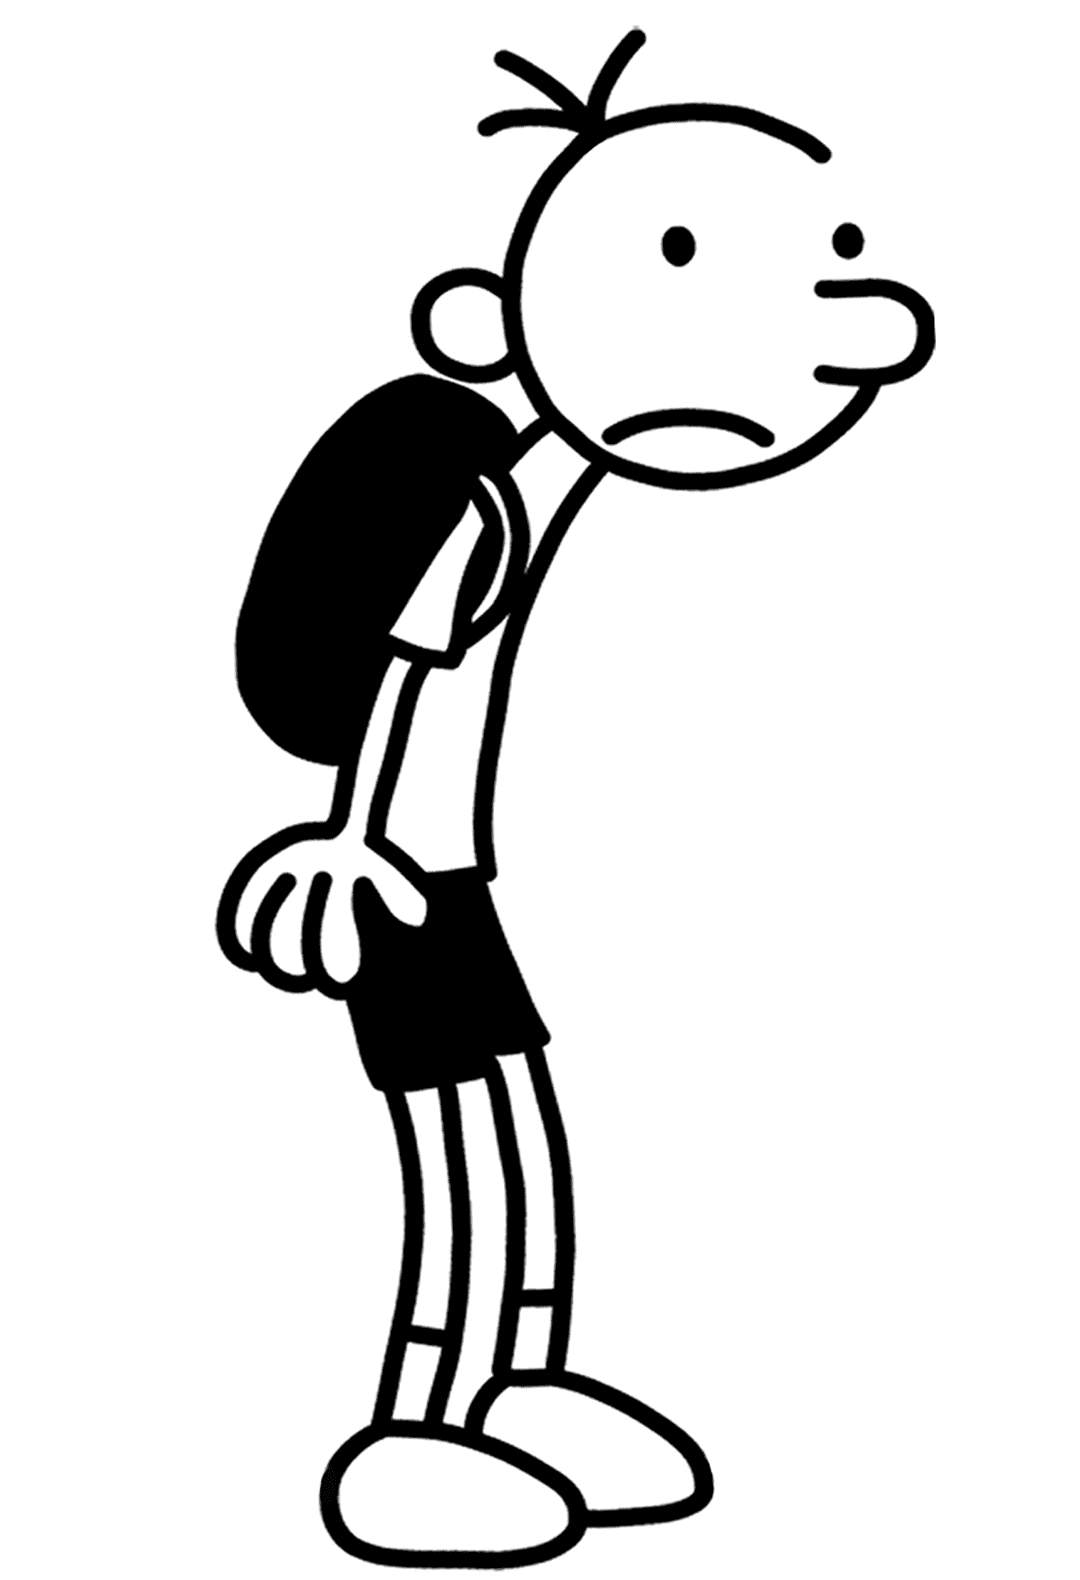 Diary of a Wimpy Kid – Greg Heffley Coloring Page